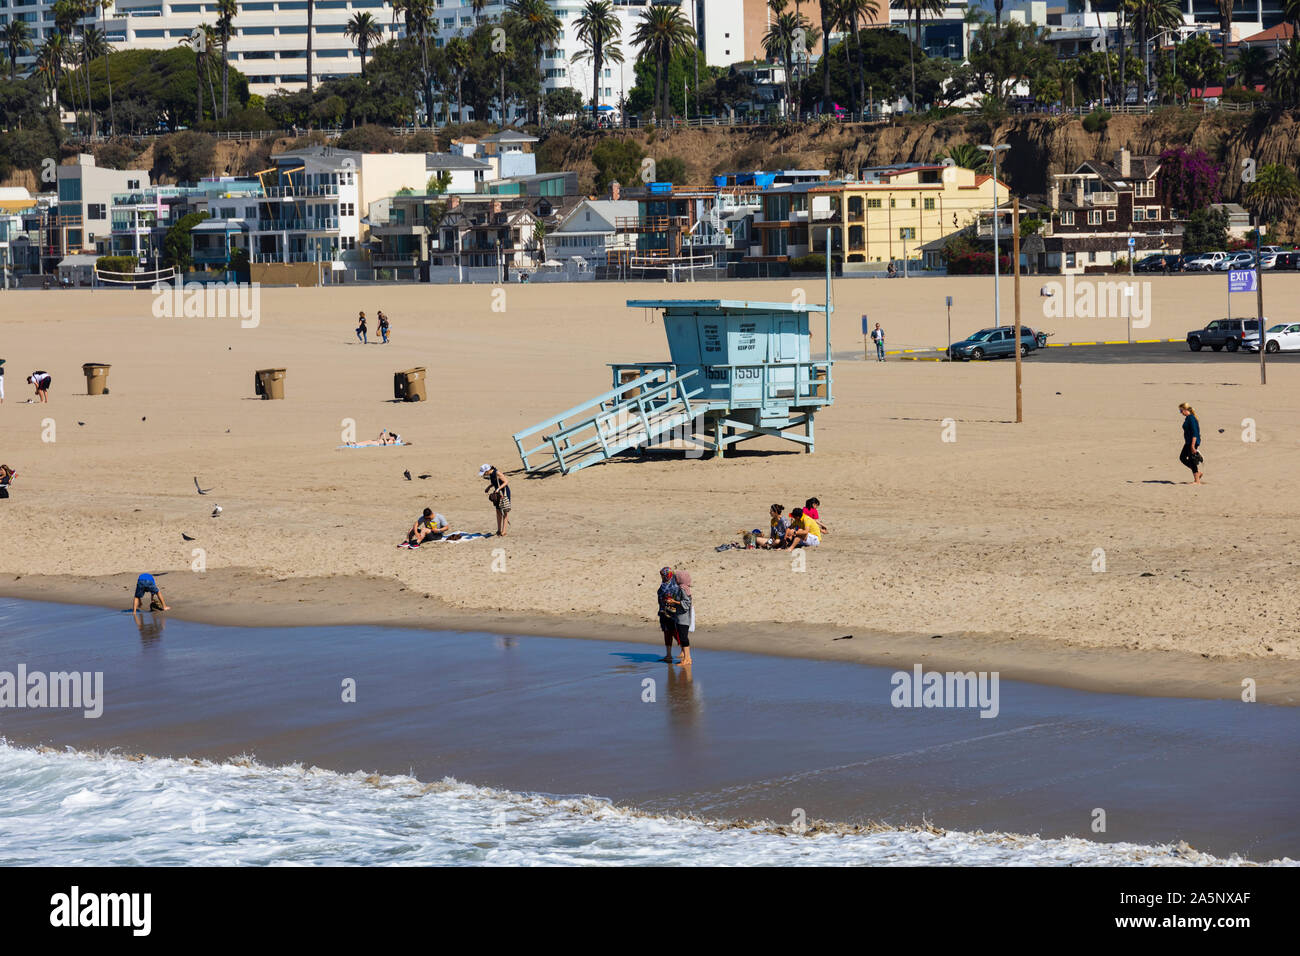 People on the beach with lifeguard tower, Santa Monica beach, California, United States of America. USA. October 2019 Stock Photo